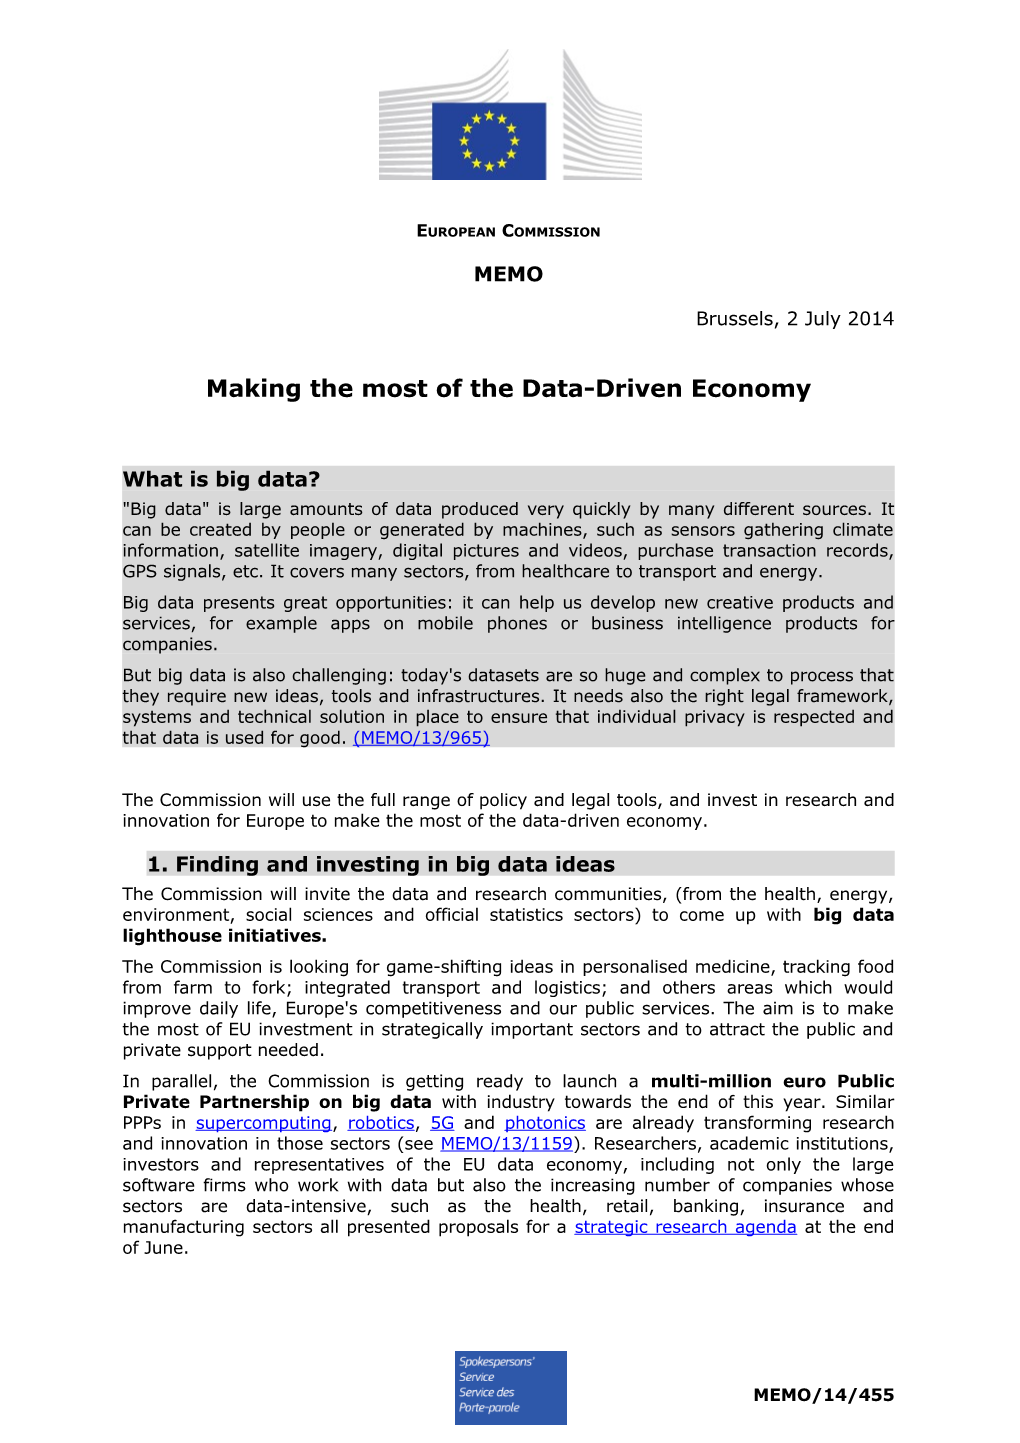 Making the Most of the Data-Driven Economy